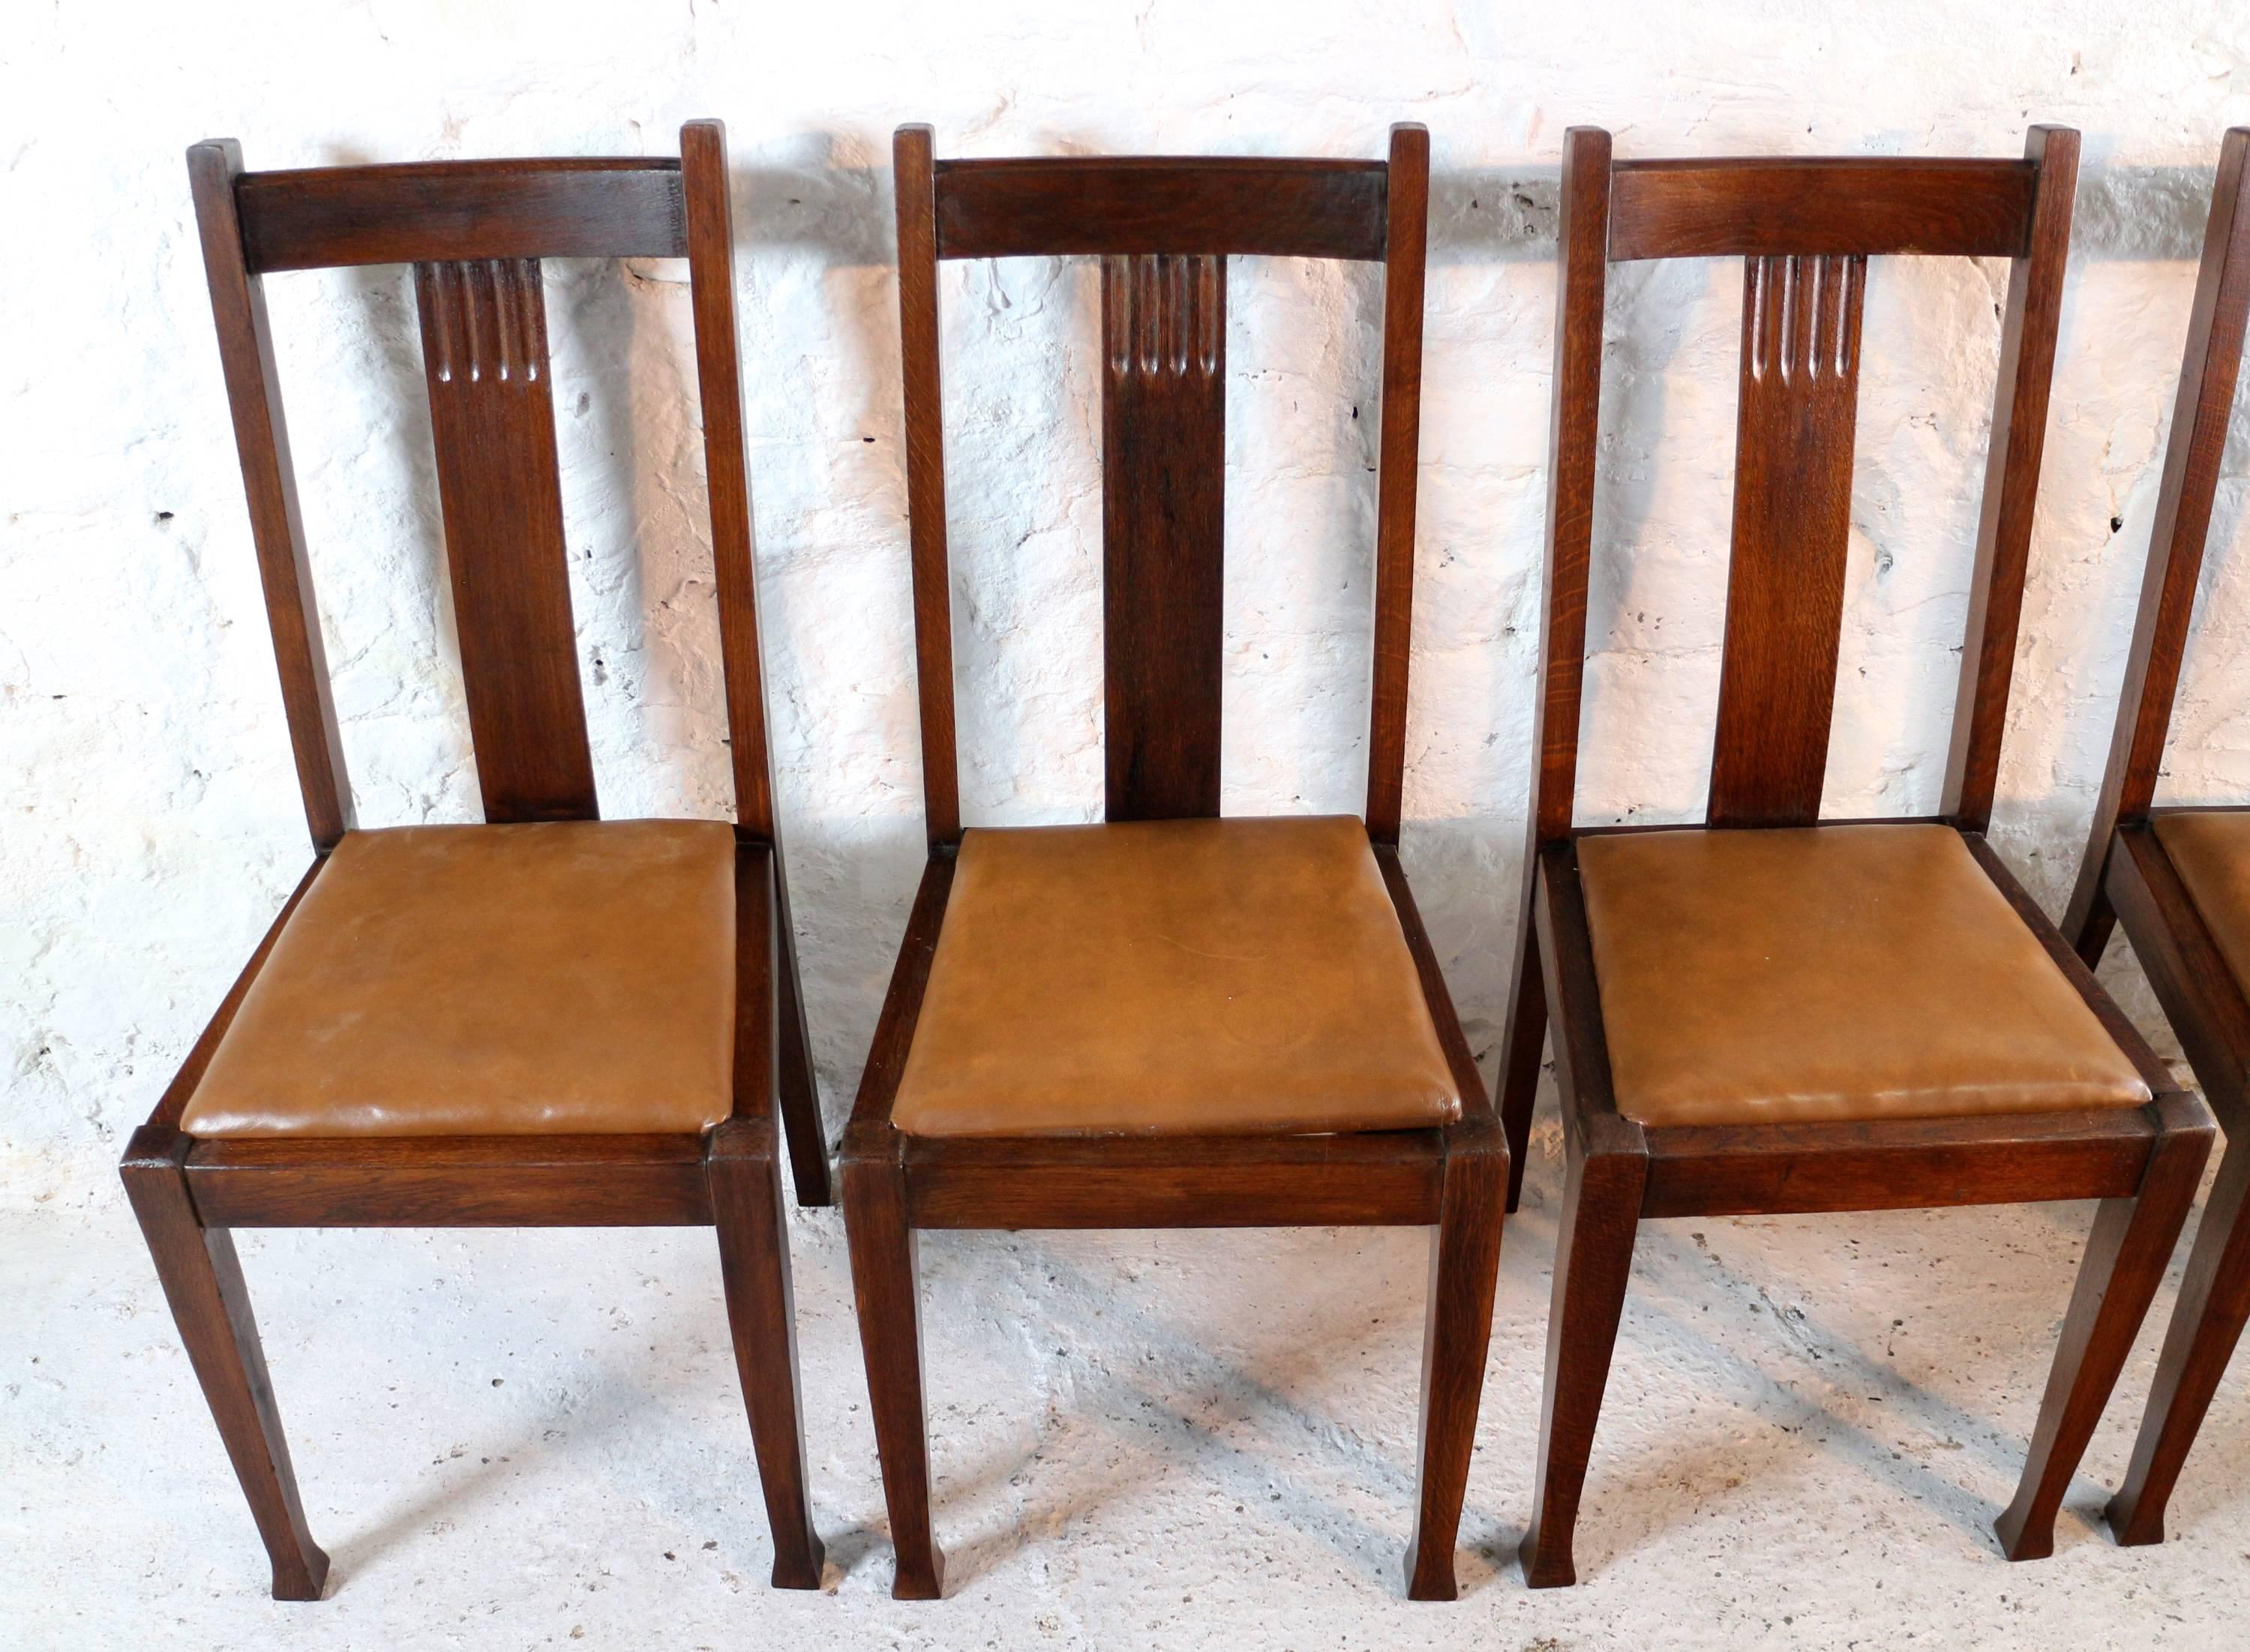 A nice set of ten Arts & Crafts dining chairs similar to the American Mission style but with shaped tapering legs. With a curved top rail and wide centre splat with fluting they have tan leather covered drop-in seat pads and slightly outplayed